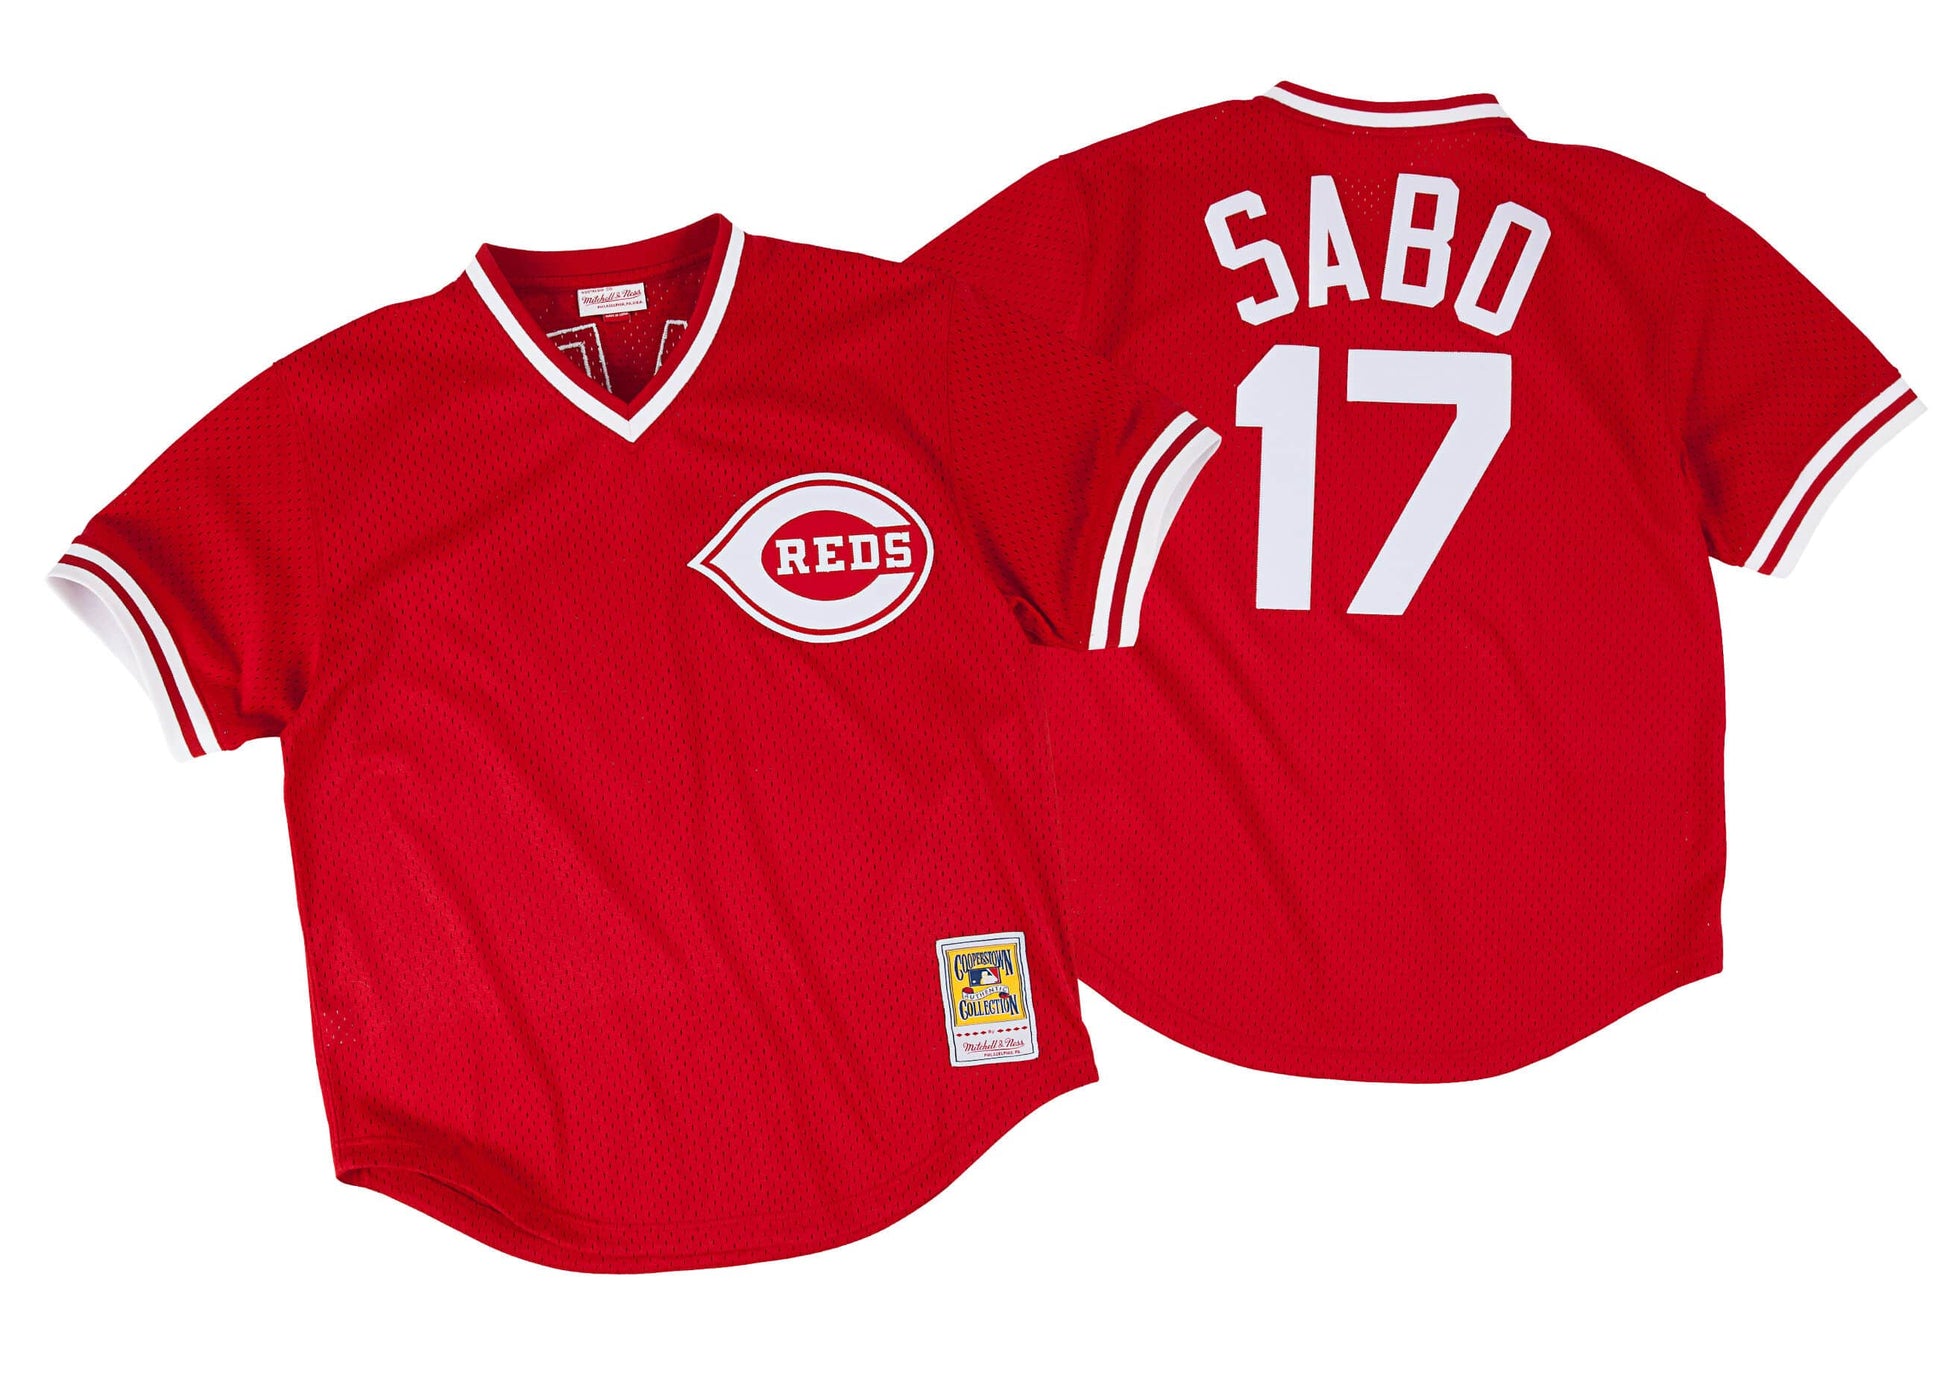 Mitchell & Ness Chris Sabo Cincinnati Reds Red Cooperstown Mesh Batting Practice Jersey Size: Small